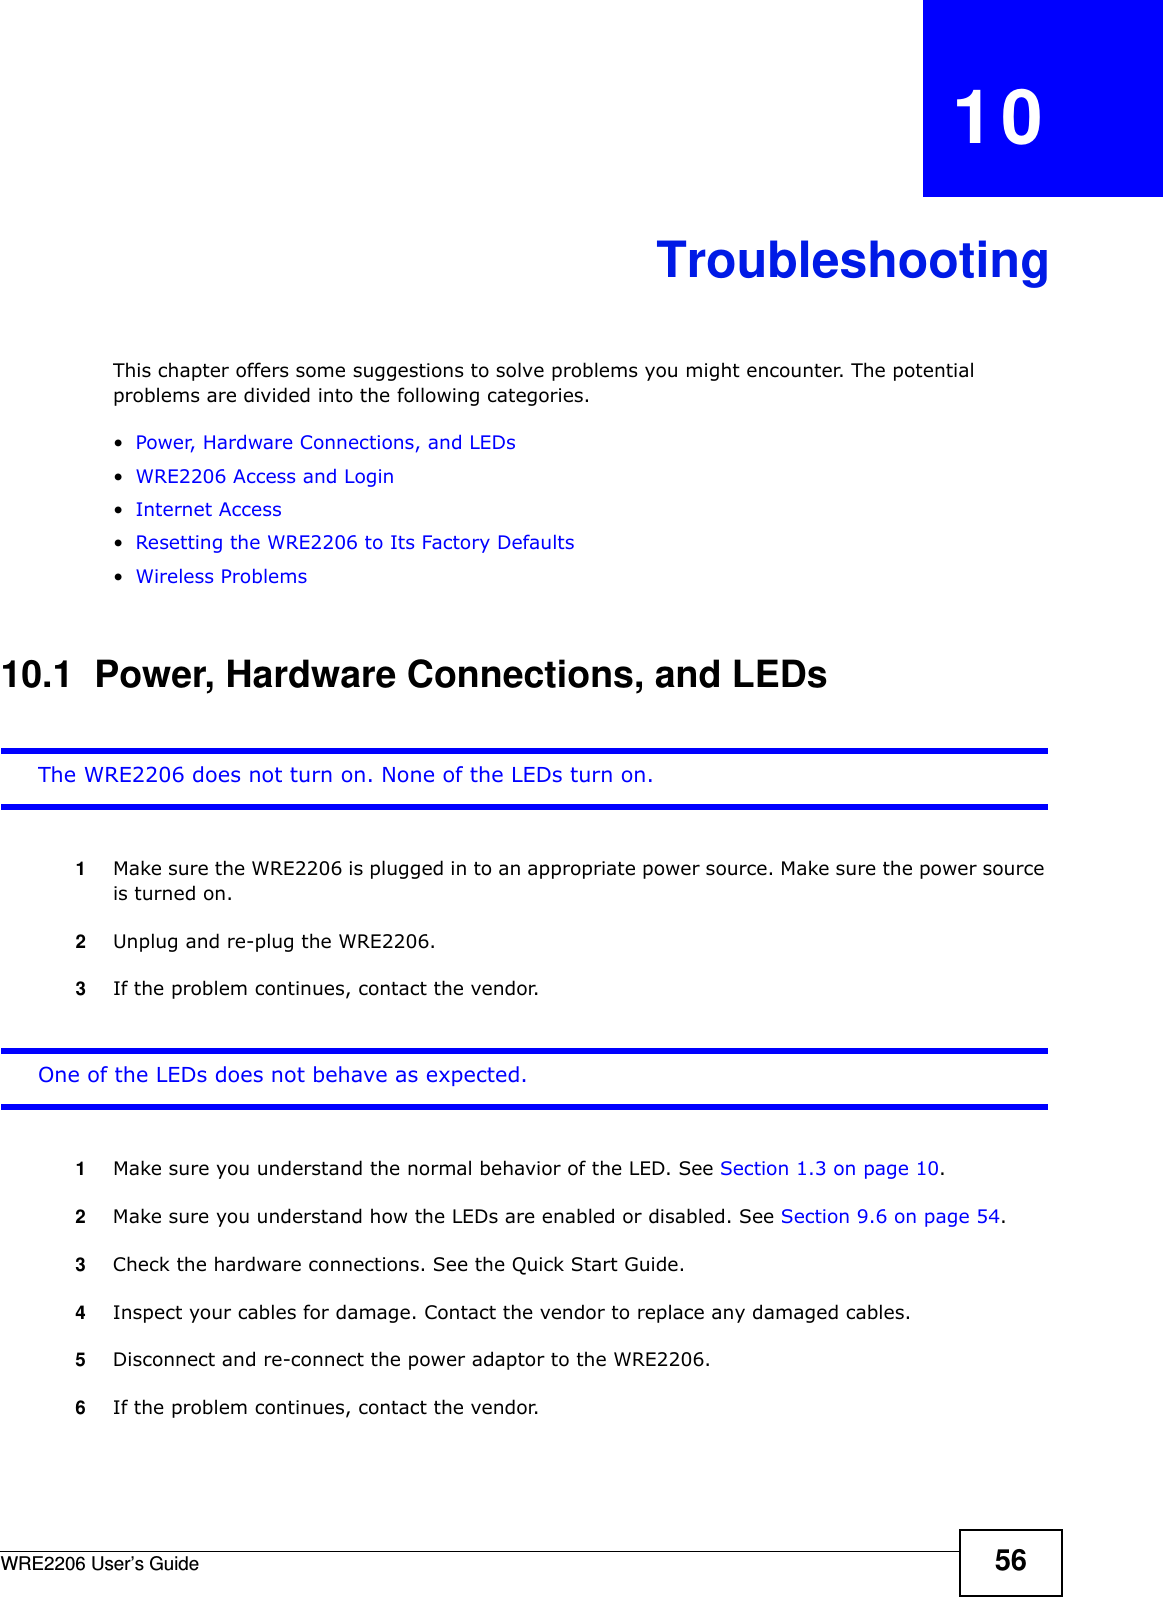 WRE2206 User’s Guide 56CHAPTER   10TroubleshootingThis chapter offers some suggestions to solve problems you might encounter. The potential problems are divided into the following categories. •Power, Hardware Connections, and LEDs•WRE2206 Access and Login•Internet Access•Resetting the WRE2206 to Its Factory Defaults•Wireless Problems10.1  Power, Hardware Connections, and LEDsThe WRE2206 does not turn on. None of the LEDs turn on.1Make sure the WRE2206 is plugged in to an appropriate power source. Make sure the power source is turned on.2Unplug and re-plug the WRE2206.3If the problem continues, contact the vendor.One of the LEDs does not behave as expected.1Make sure you understand the normal behavior of the LED. See Section 1.3 on page 10.2Make sure you understand how the LEDs are enabled or disabled. See Section 9.6 on page 54.3Check the hardware connections. See the Quick Start Guide. 4Inspect your cables for damage. Contact the vendor to replace any damaged cables.5Disconnect and re-connect the power adaptor to the WRE2206. 6If the problem continues, contact the vendor.